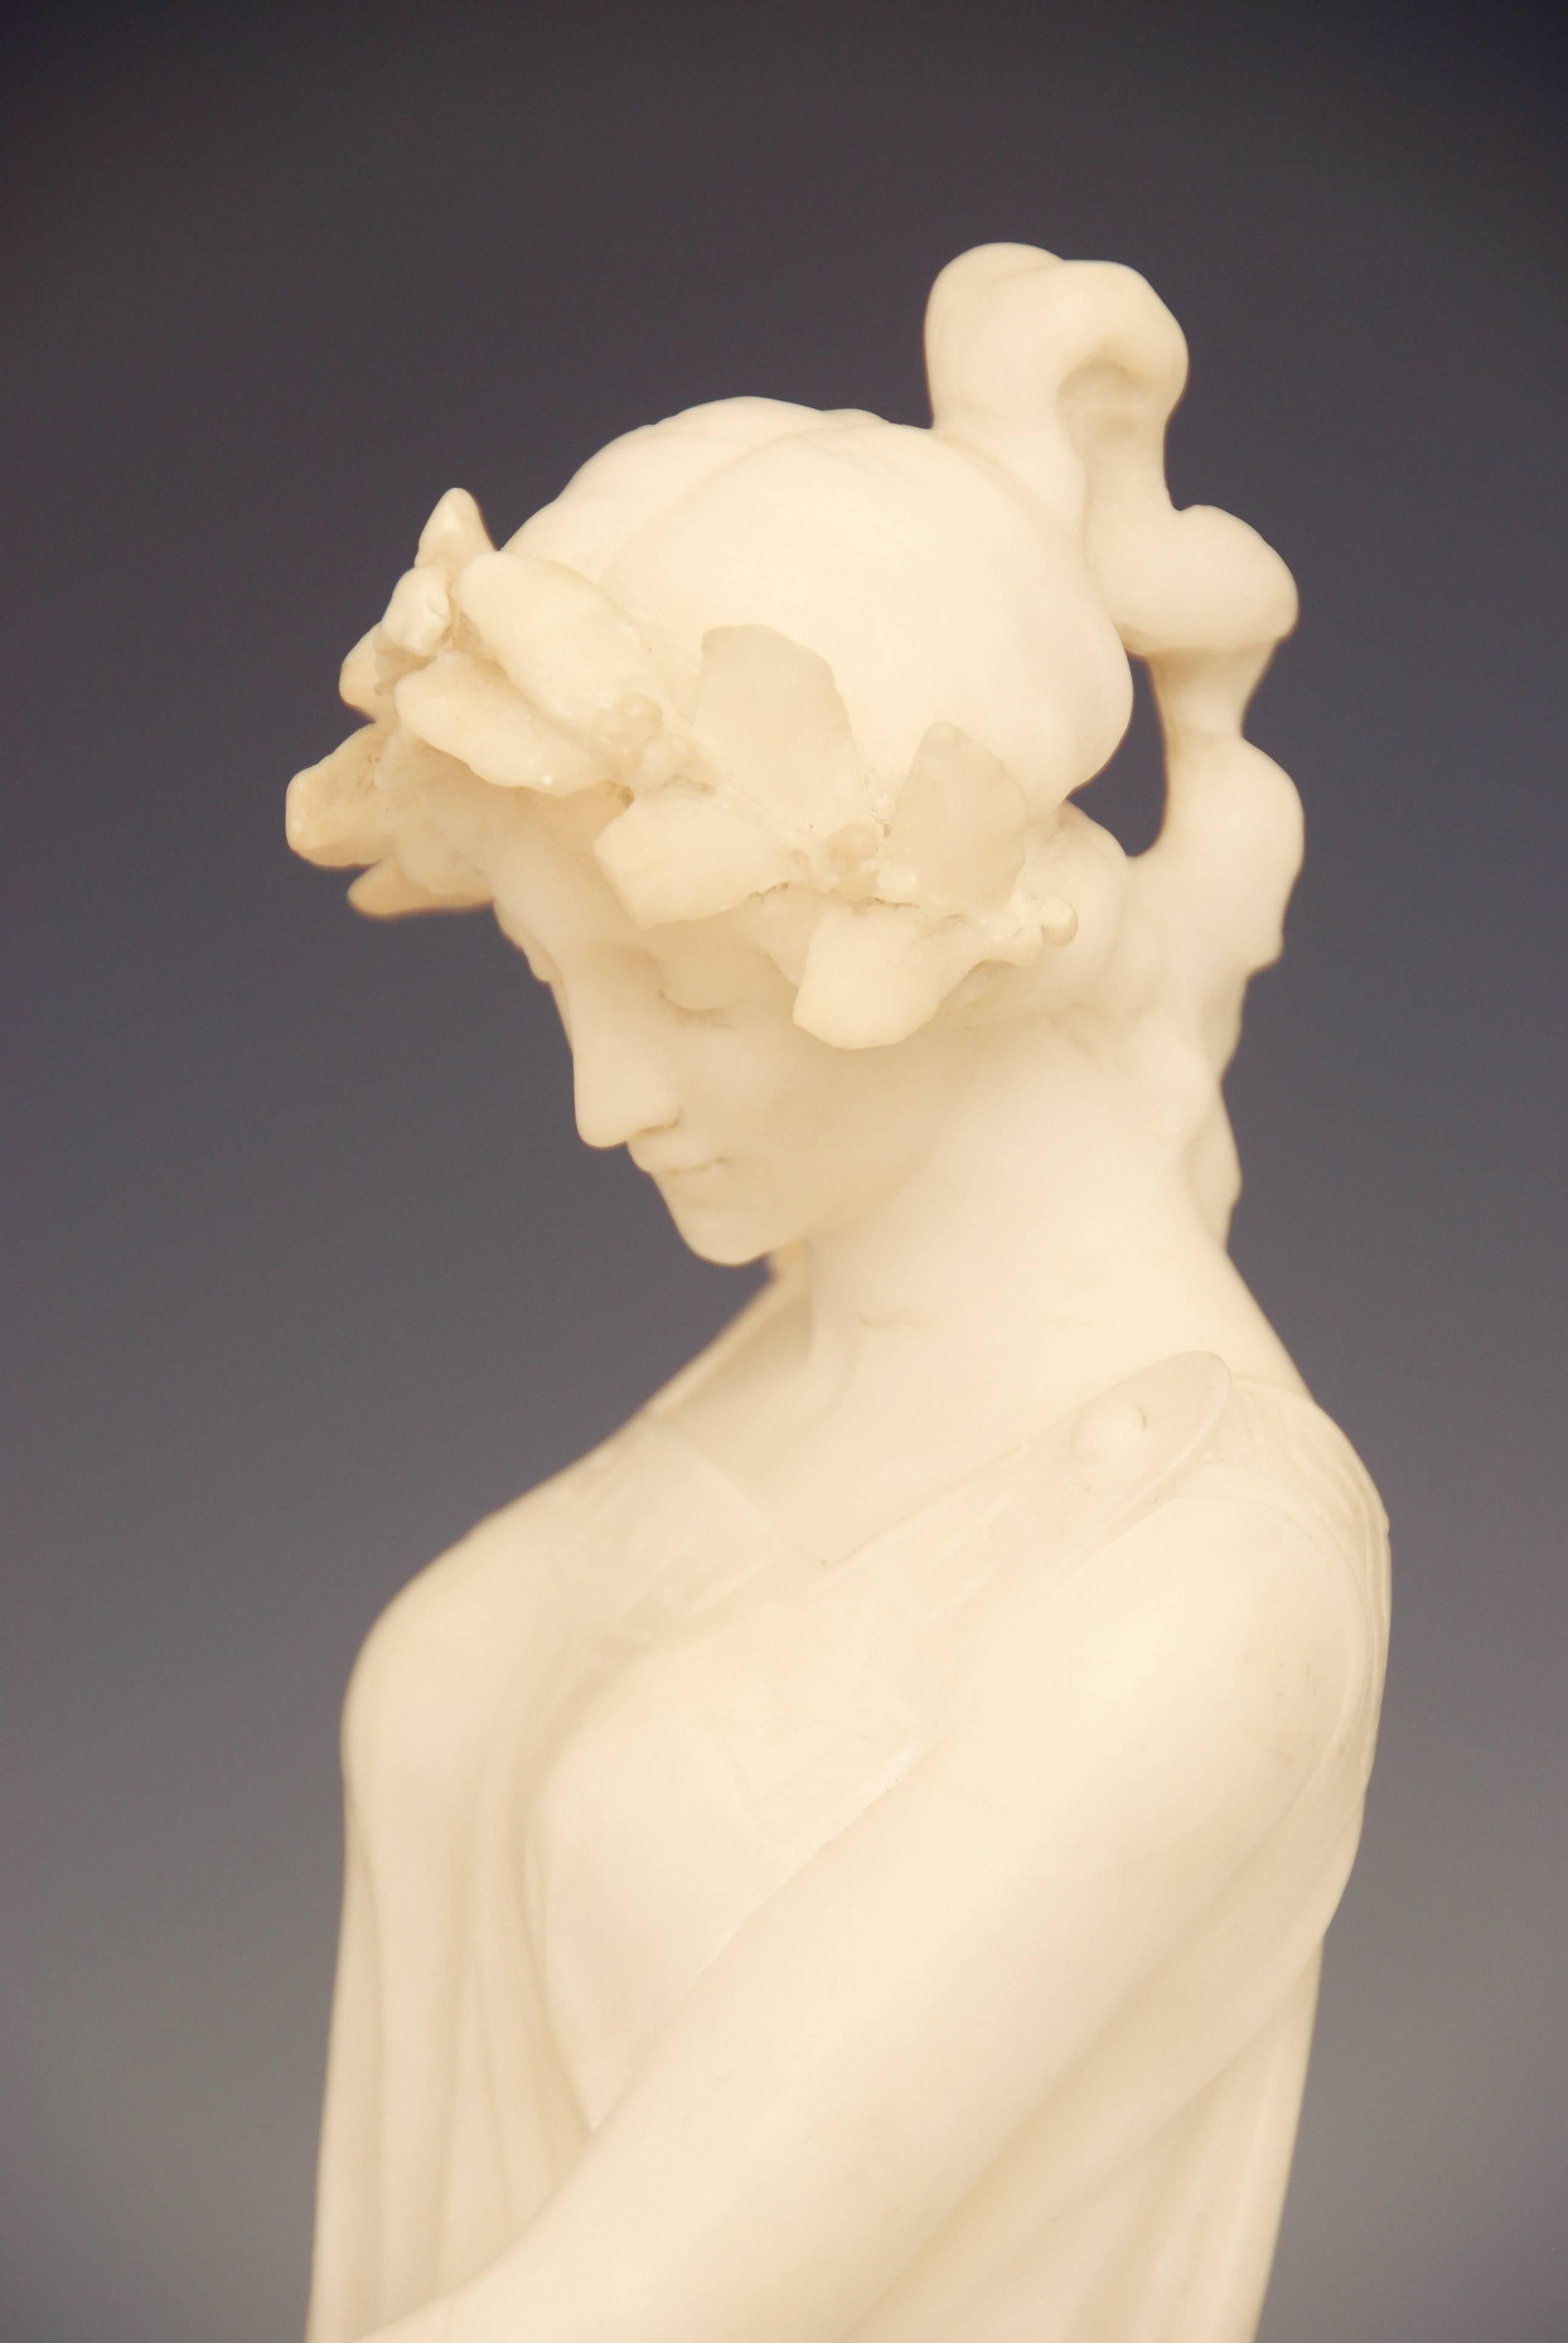 Early 20th Century Italian Carved Alabaster Art Nouveau Statue of a Muse Holding a Lyre by Luchini